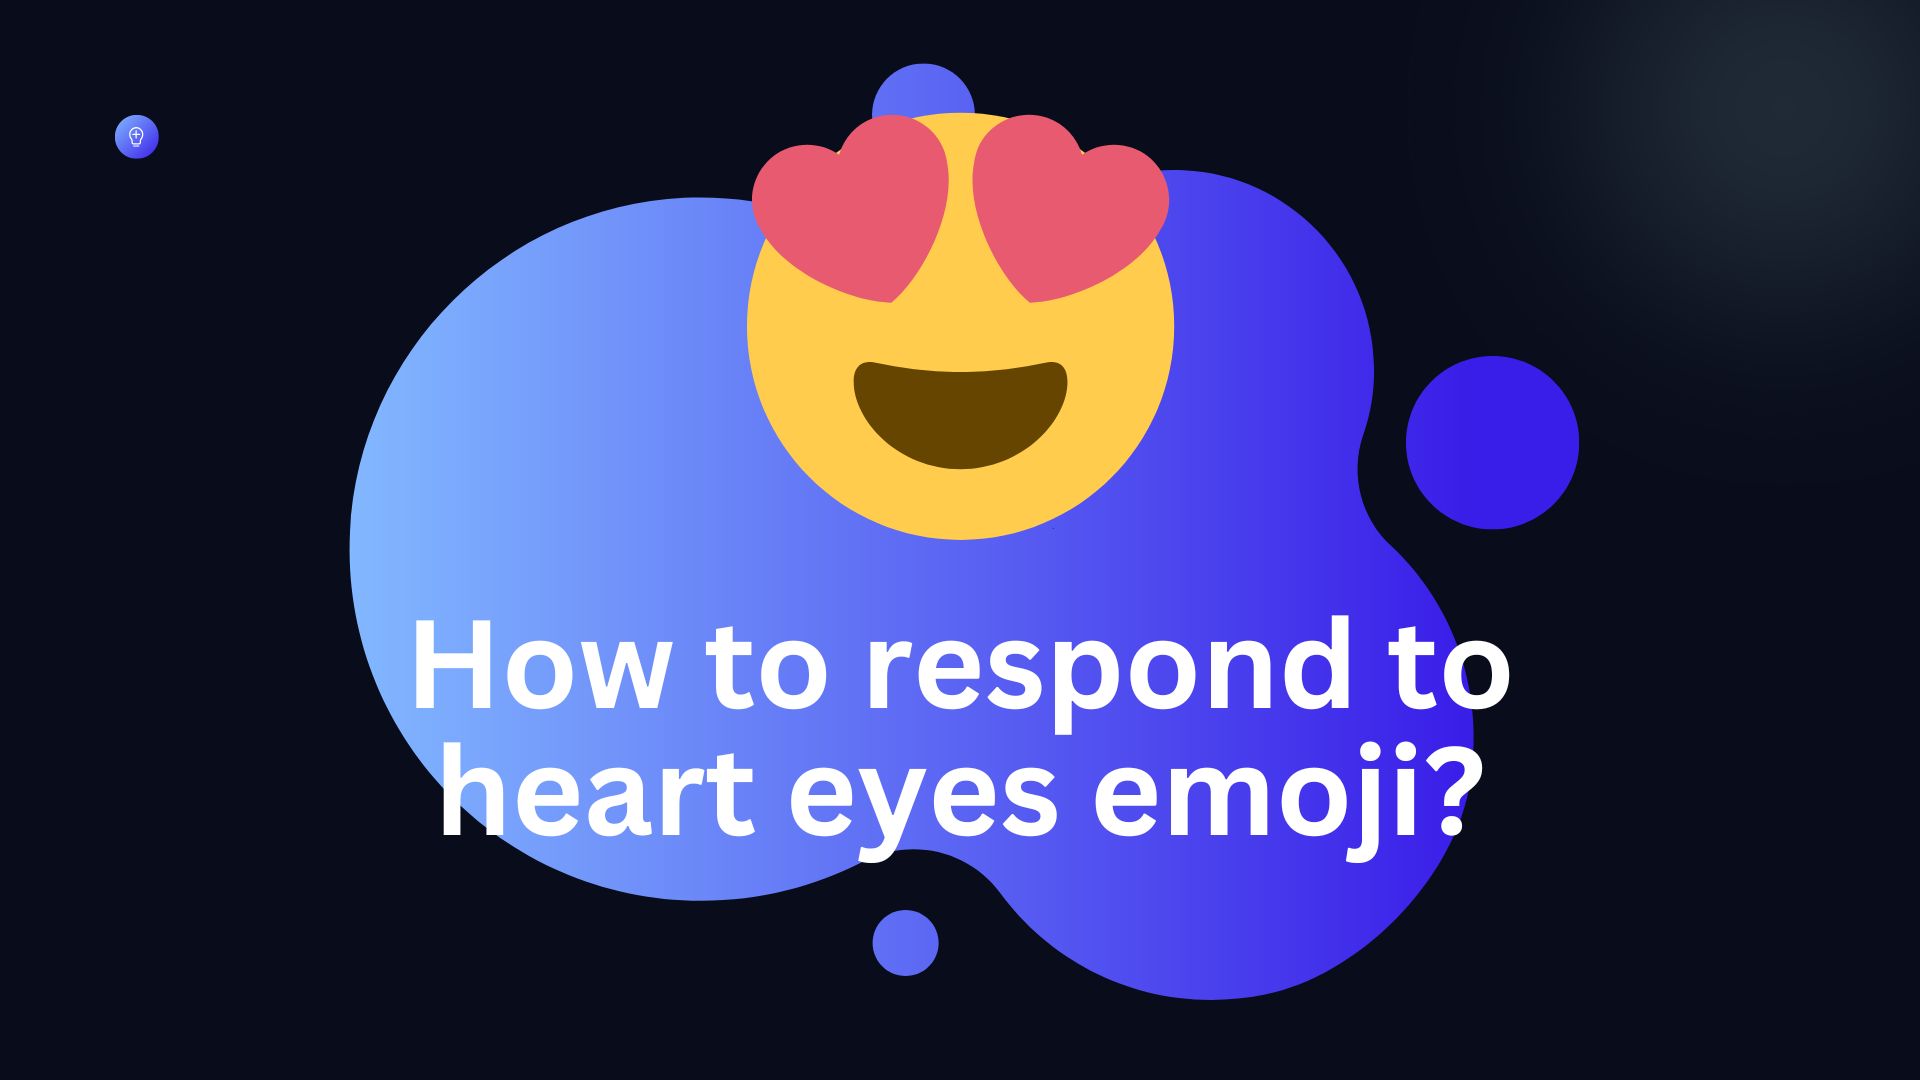 How to respond to heart eyes emoji